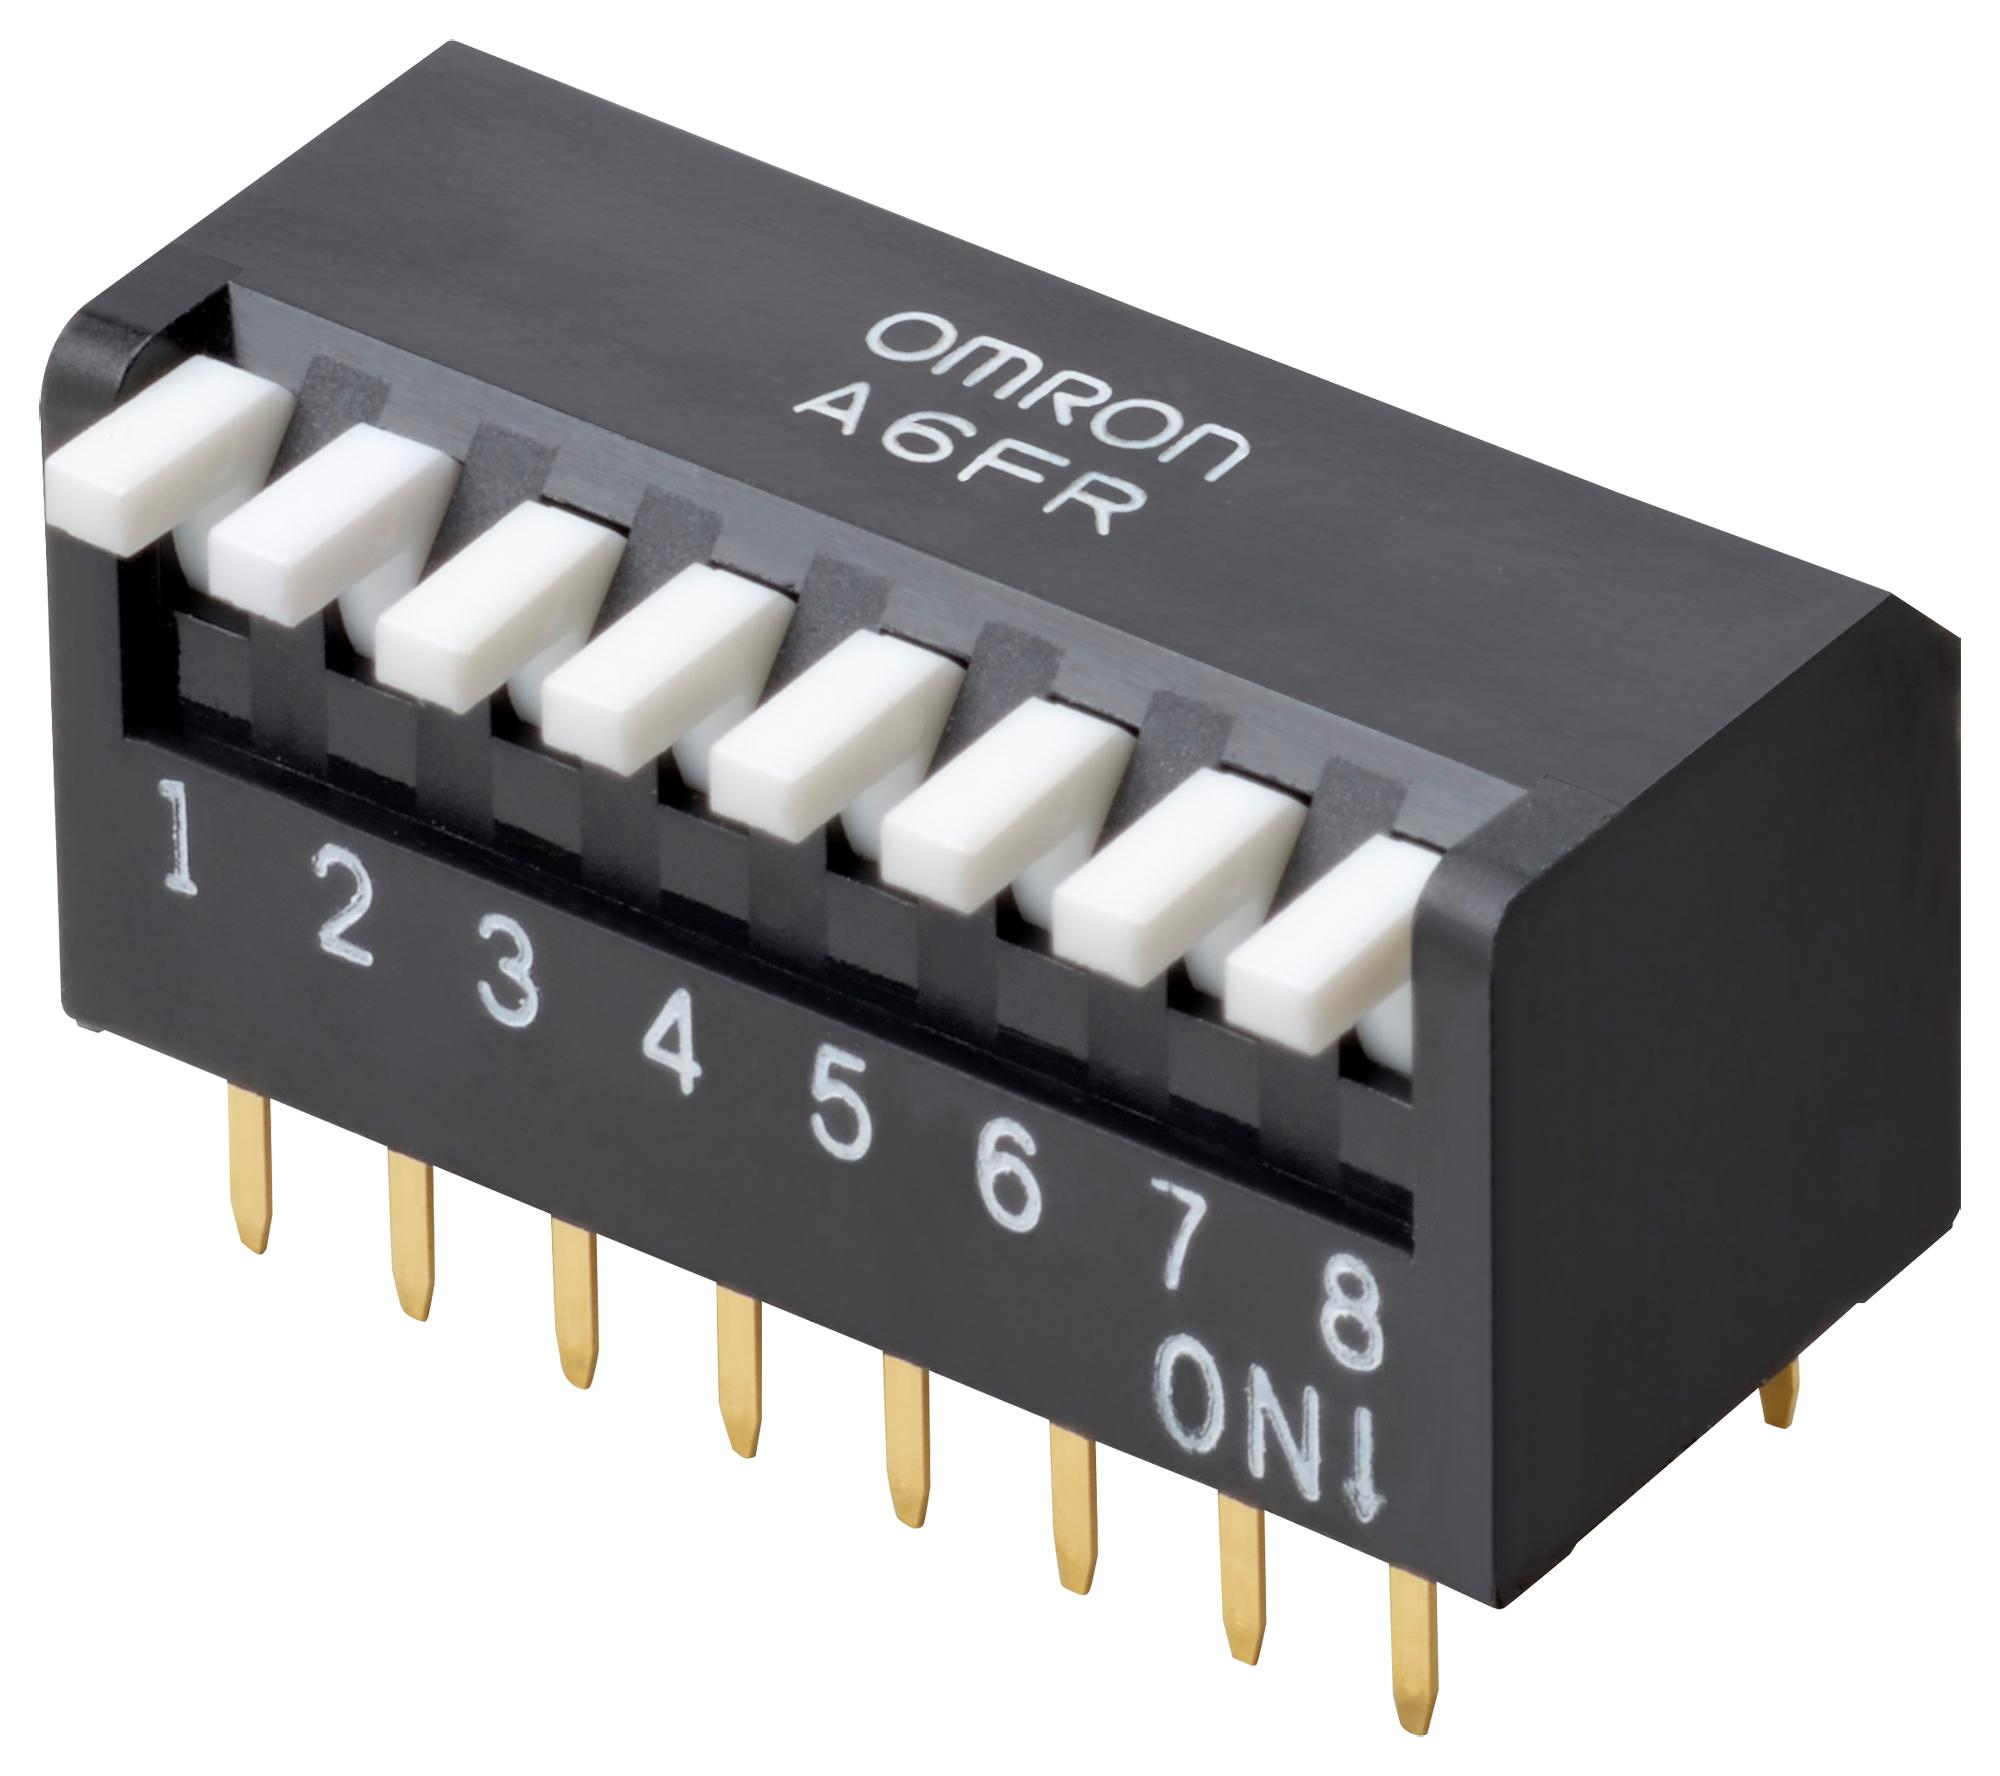 A6FR-7104 DIP SWITCH, 7POS, SPST, PIANO KEY, TH OMRON